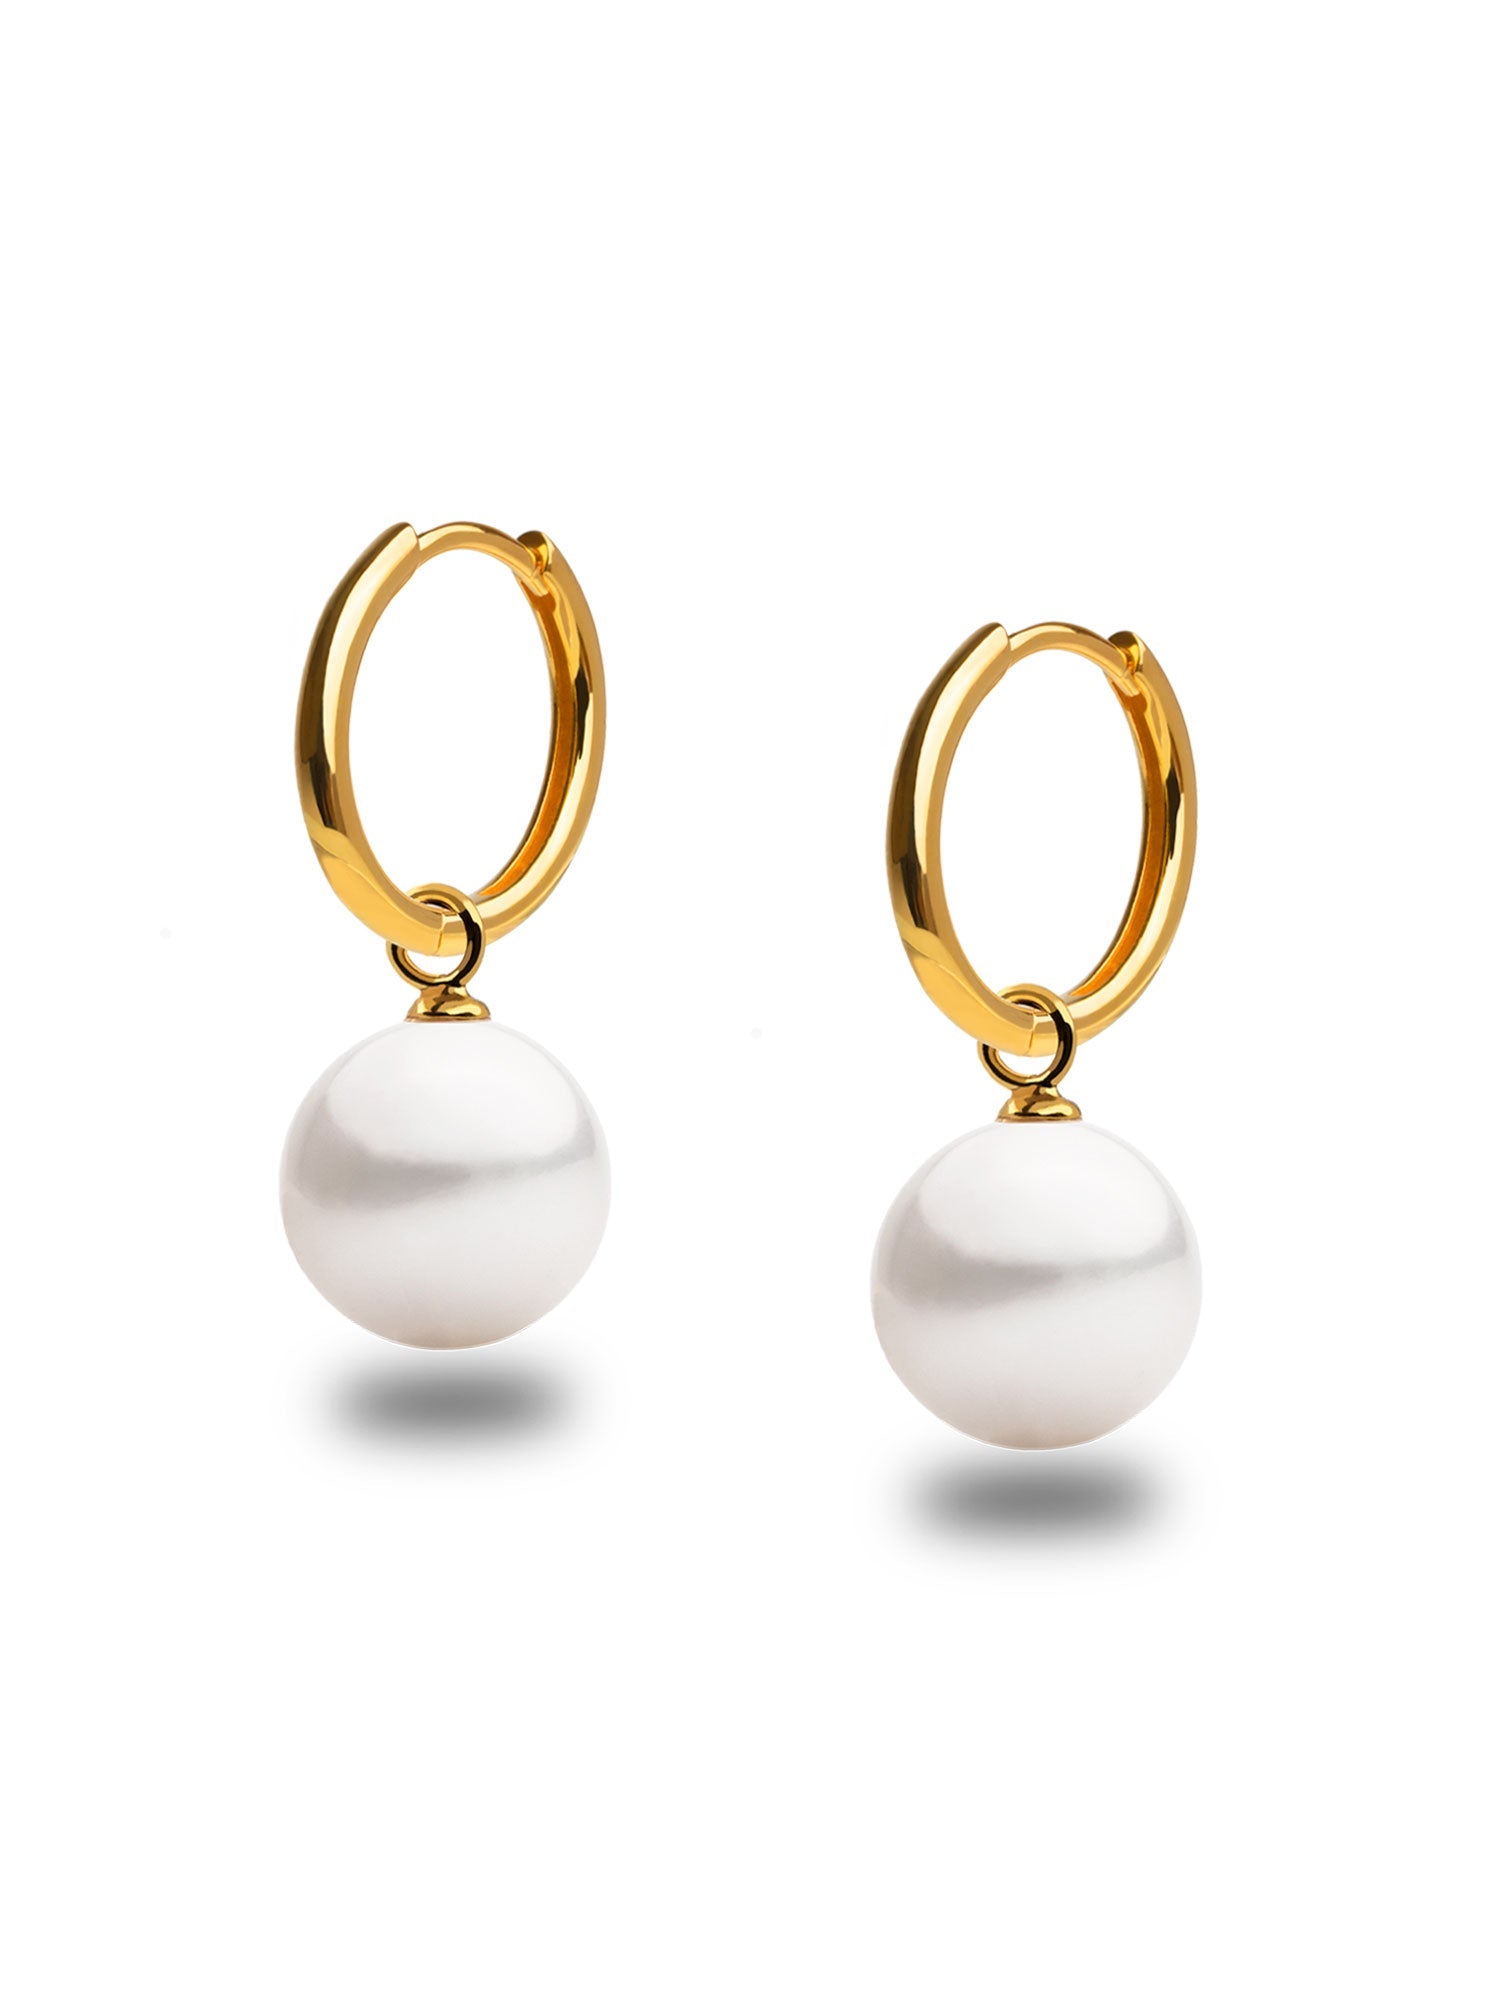 Gold Vermeil Hoops with Round Pearl - 16mm